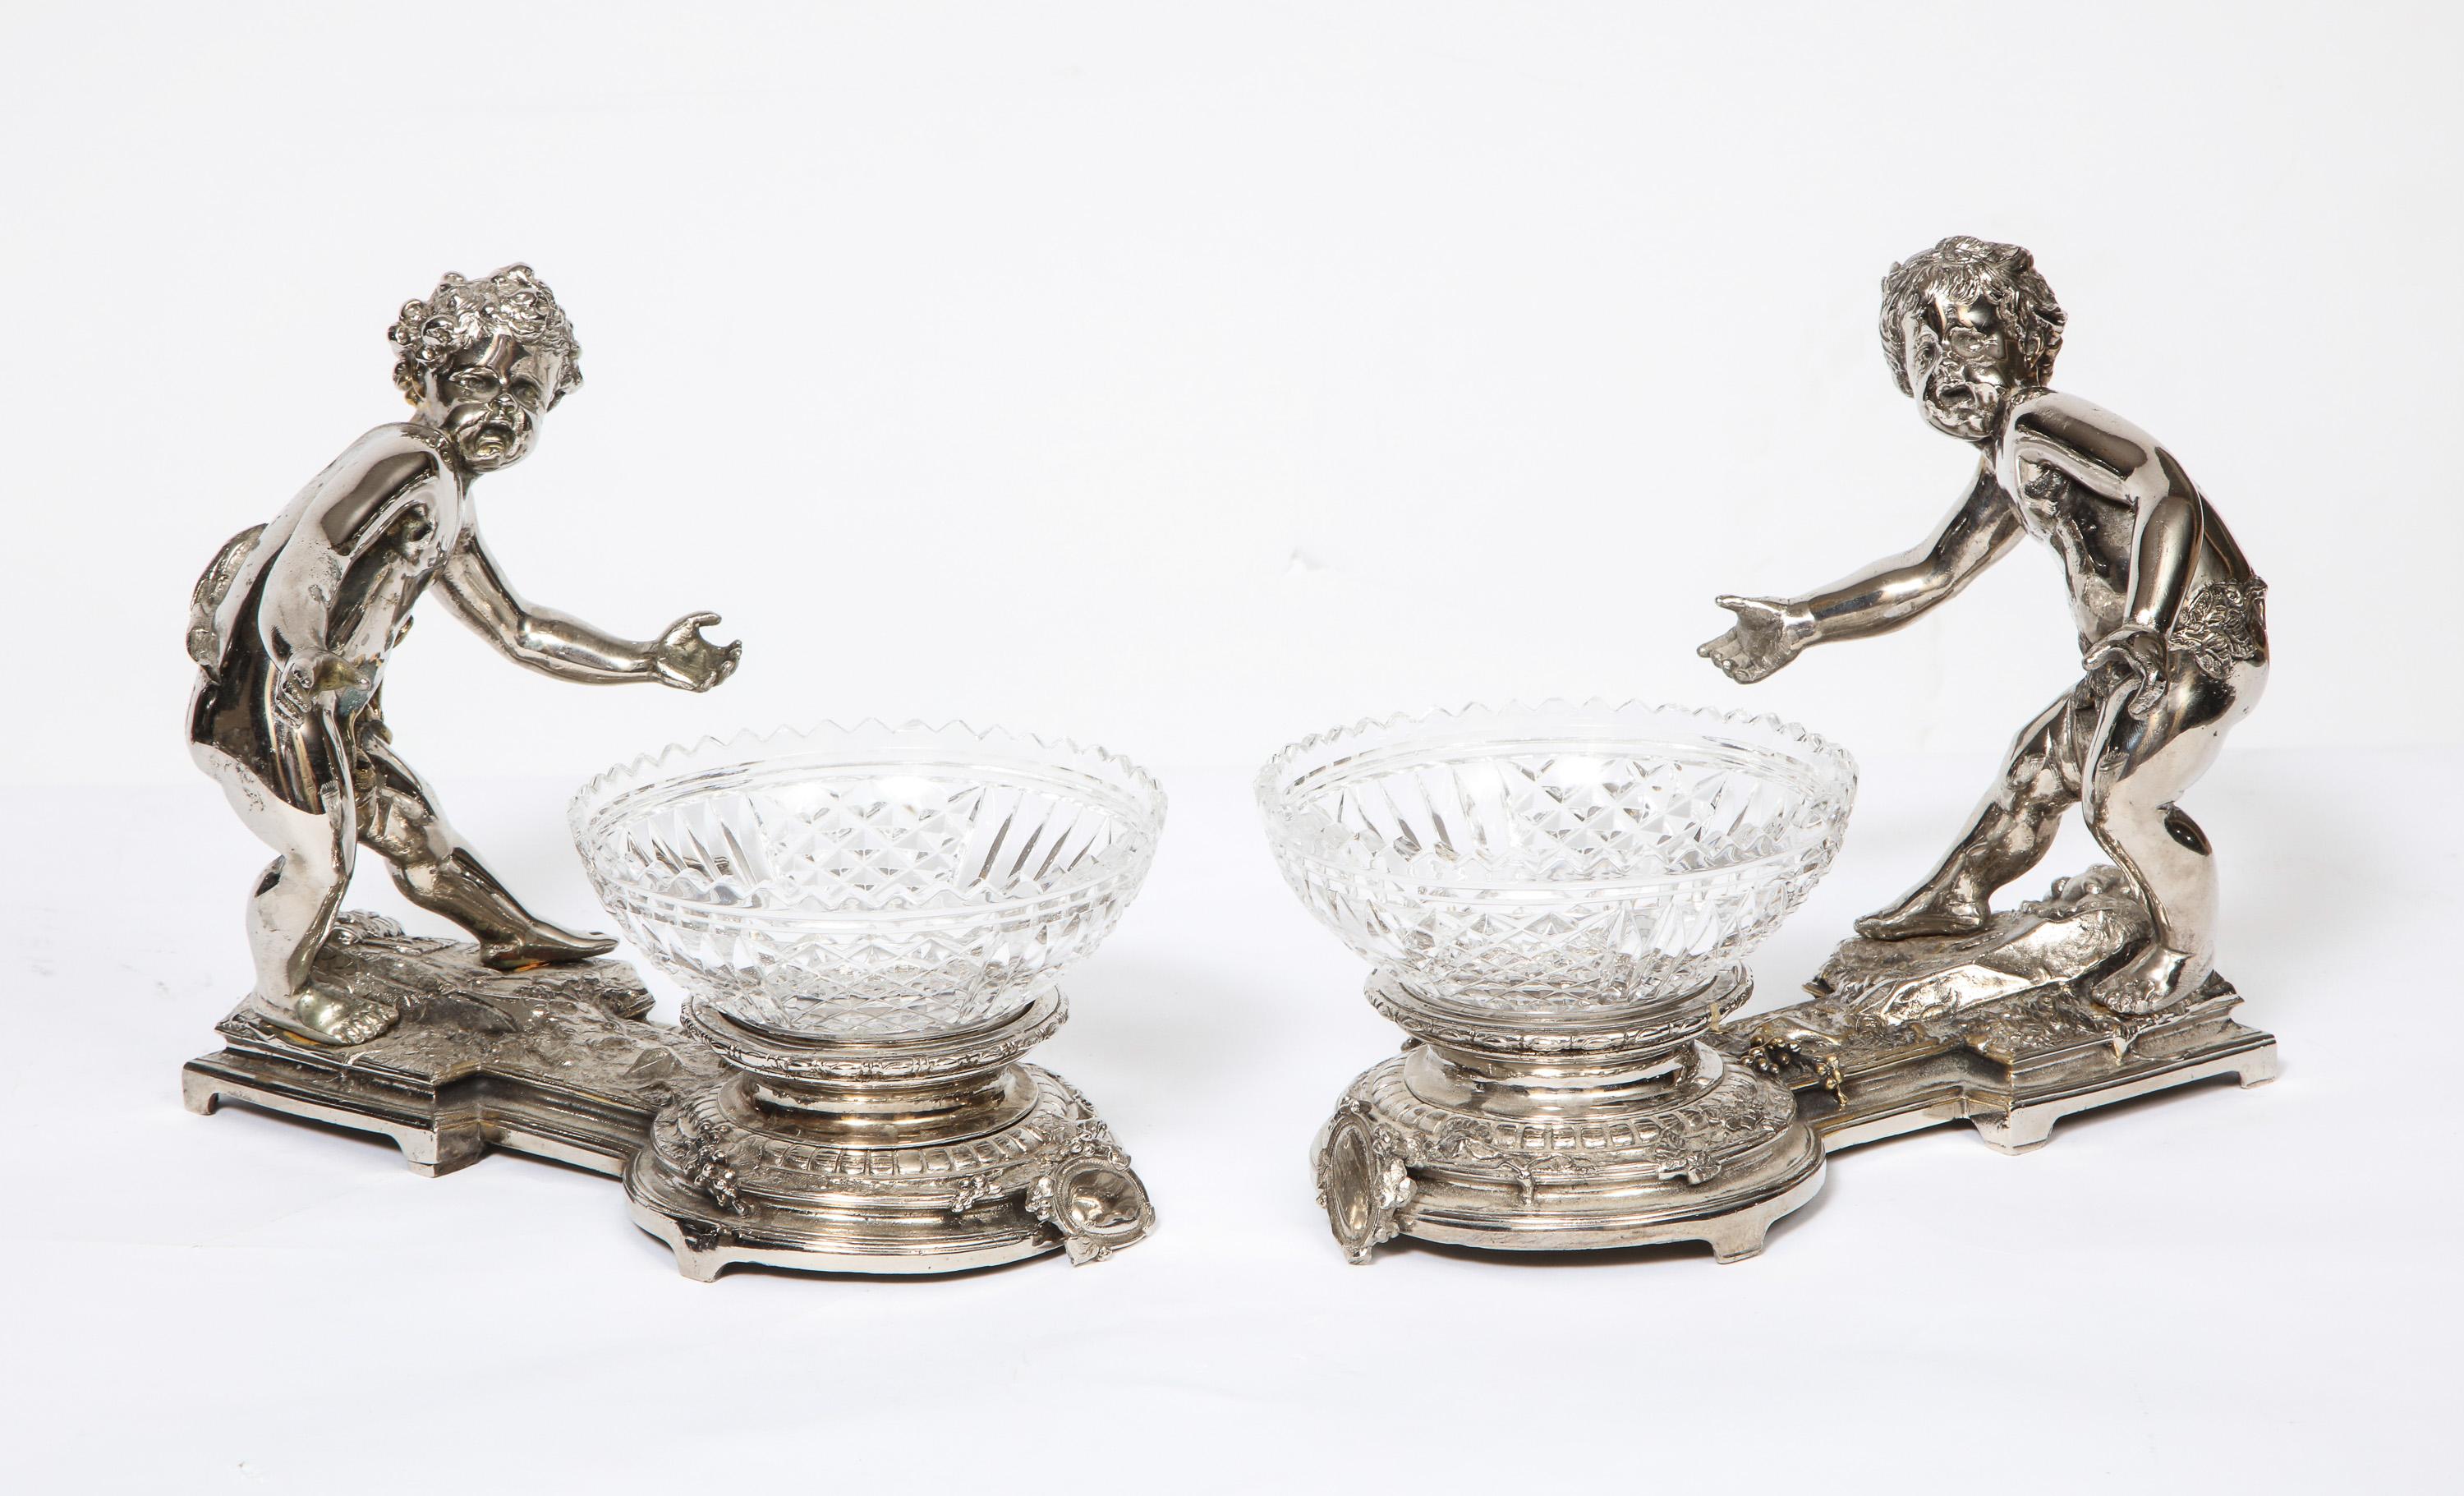 20th Century Pair of French Silvered Bronze and Glass Centerpieces with Cherubs